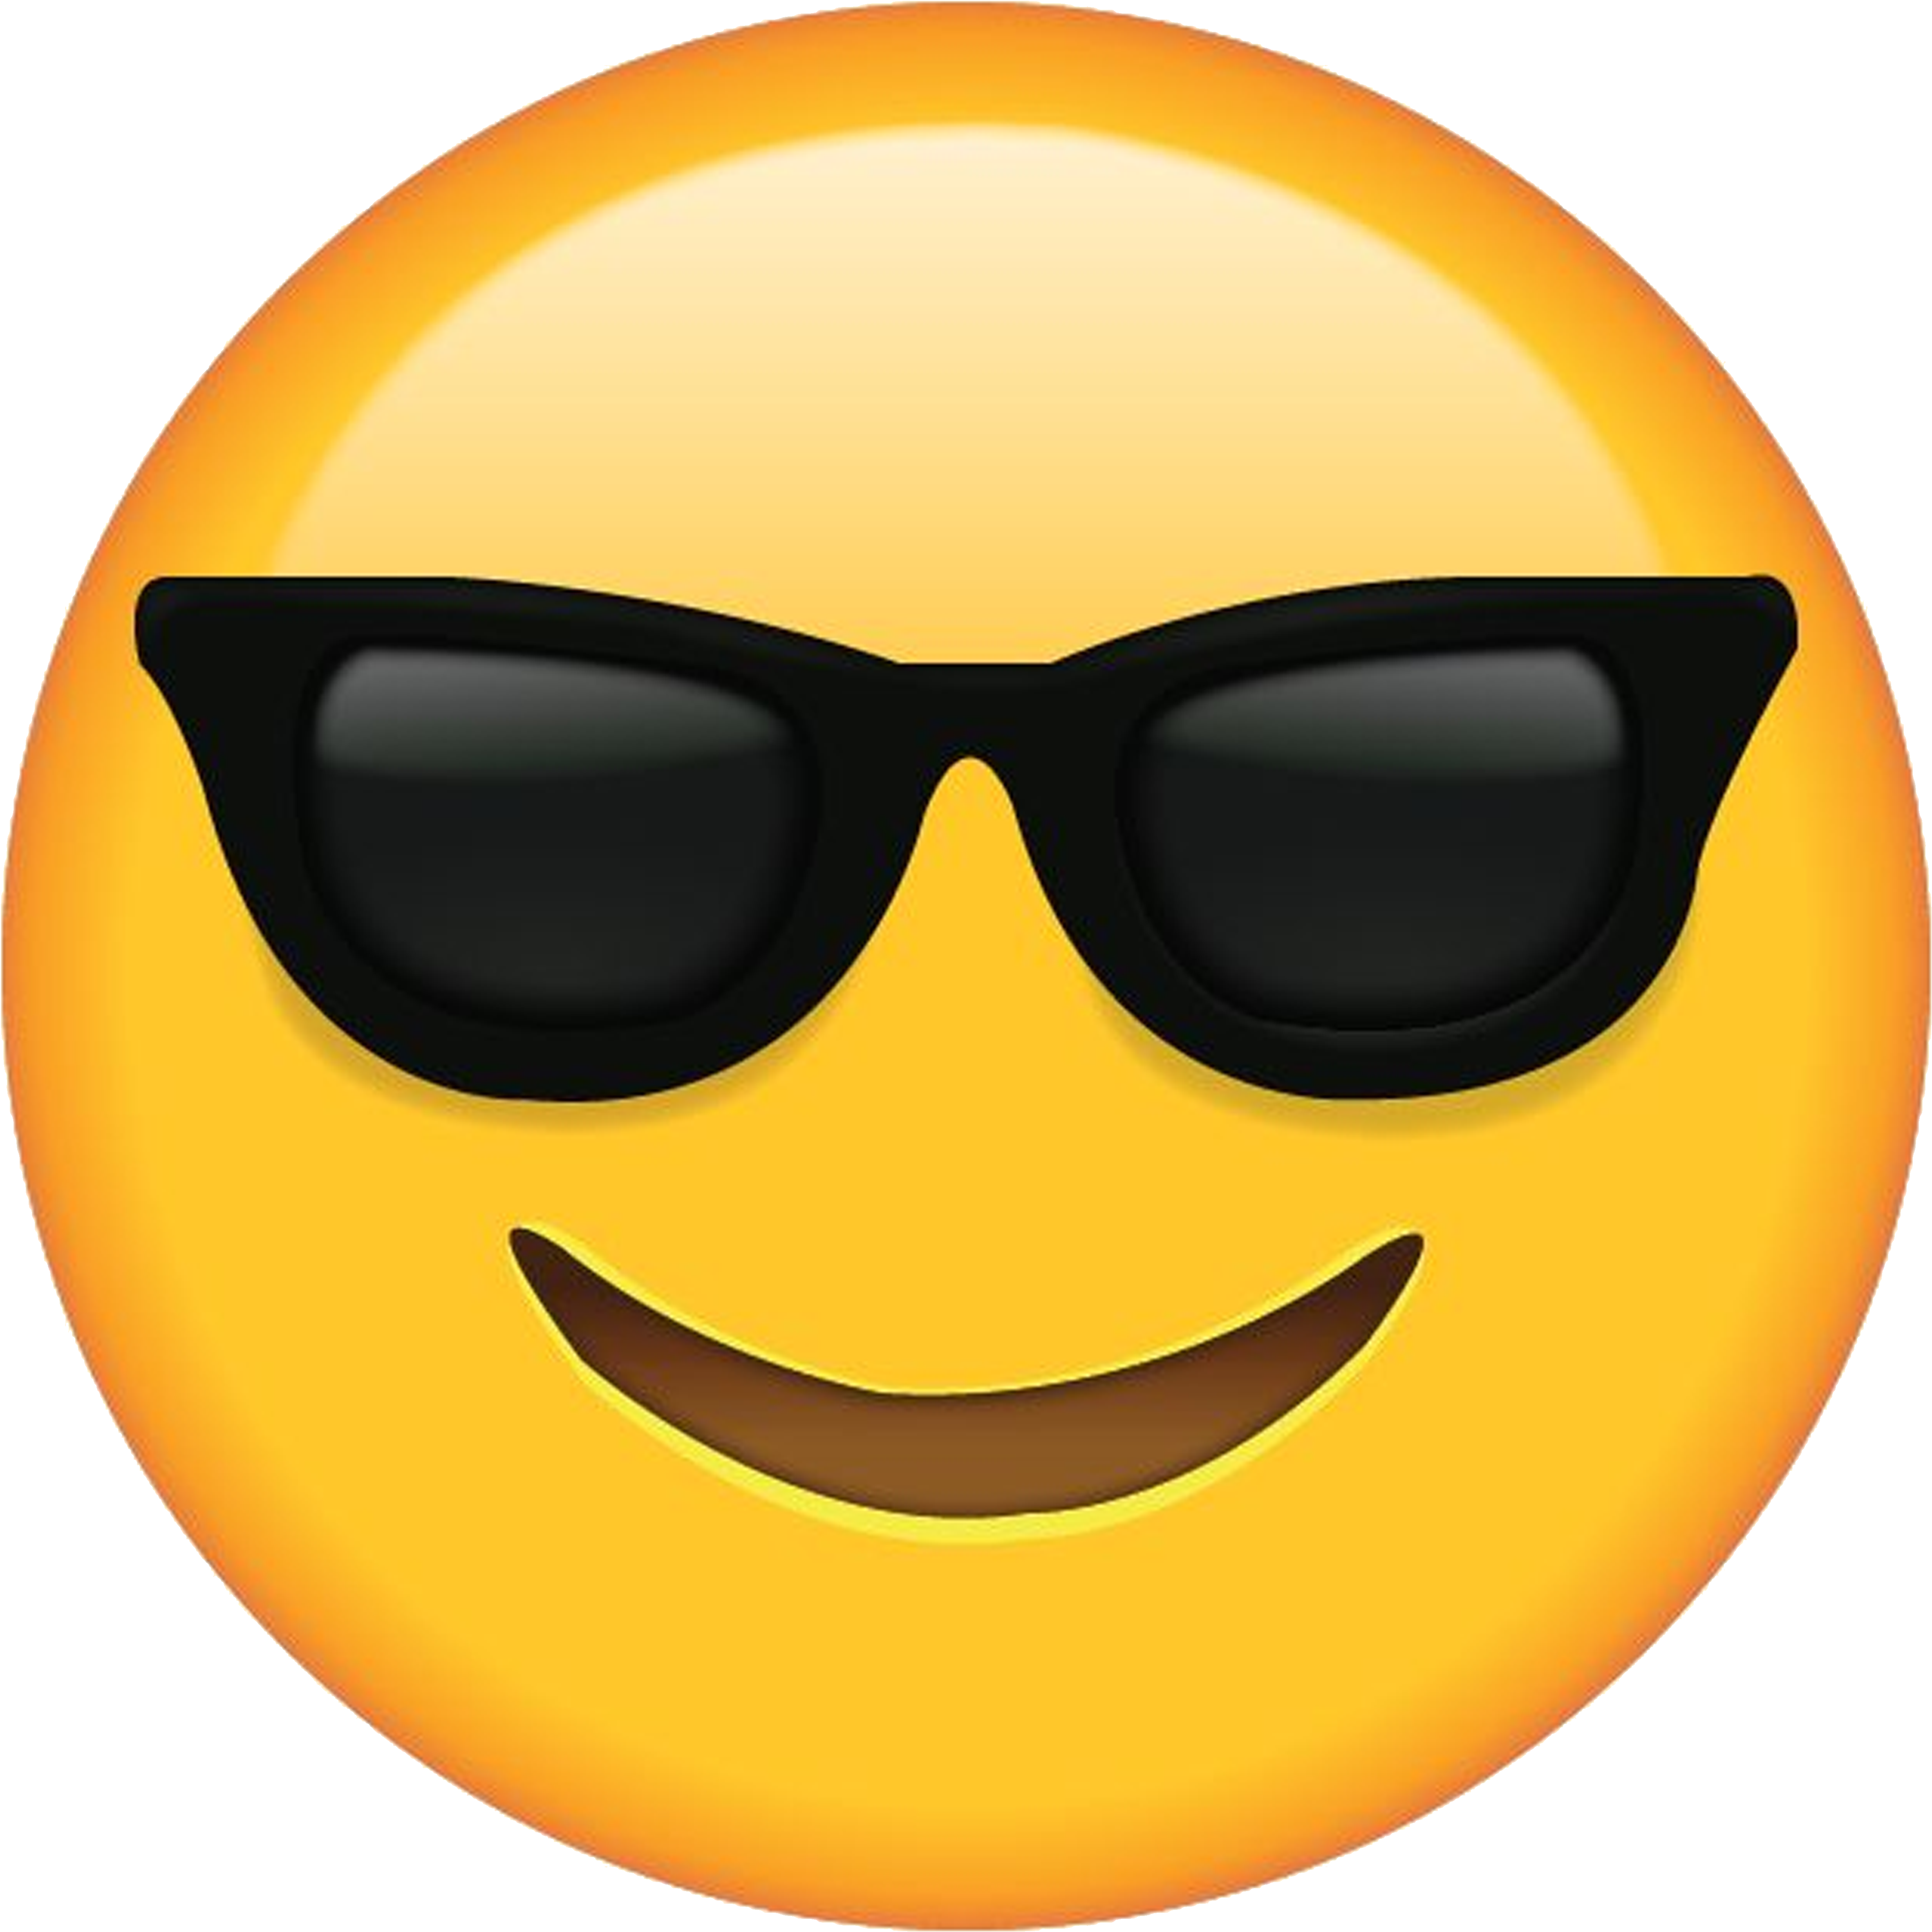 A Yellow Smiley Face With Sunglasses